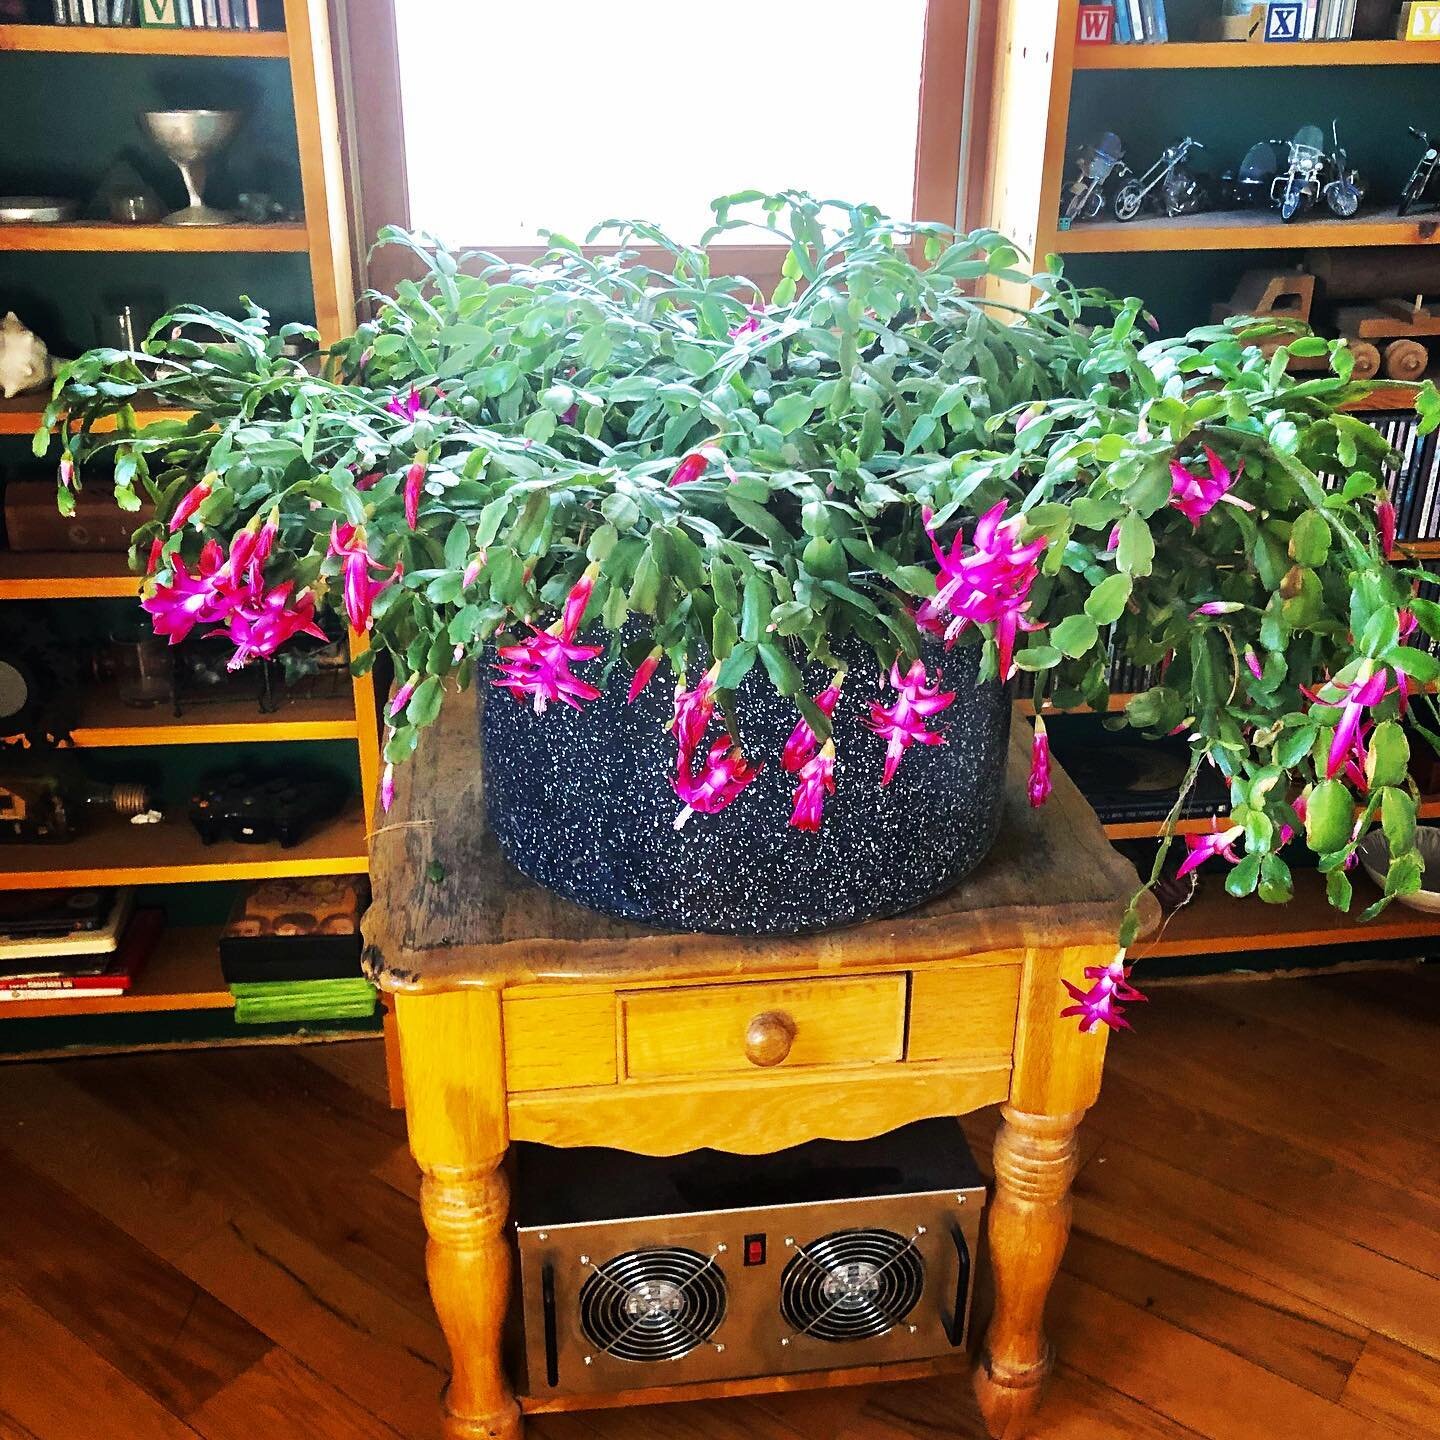 This amazing Christmas Cactus was given to us by a dear friend.
-
It is estimated to be over 100 years old! No joke.
-
We have it planted in an old chili pot and it blooms around the holidays every year.
-
Is this amazing or what!?
-
And, if you&rsqu